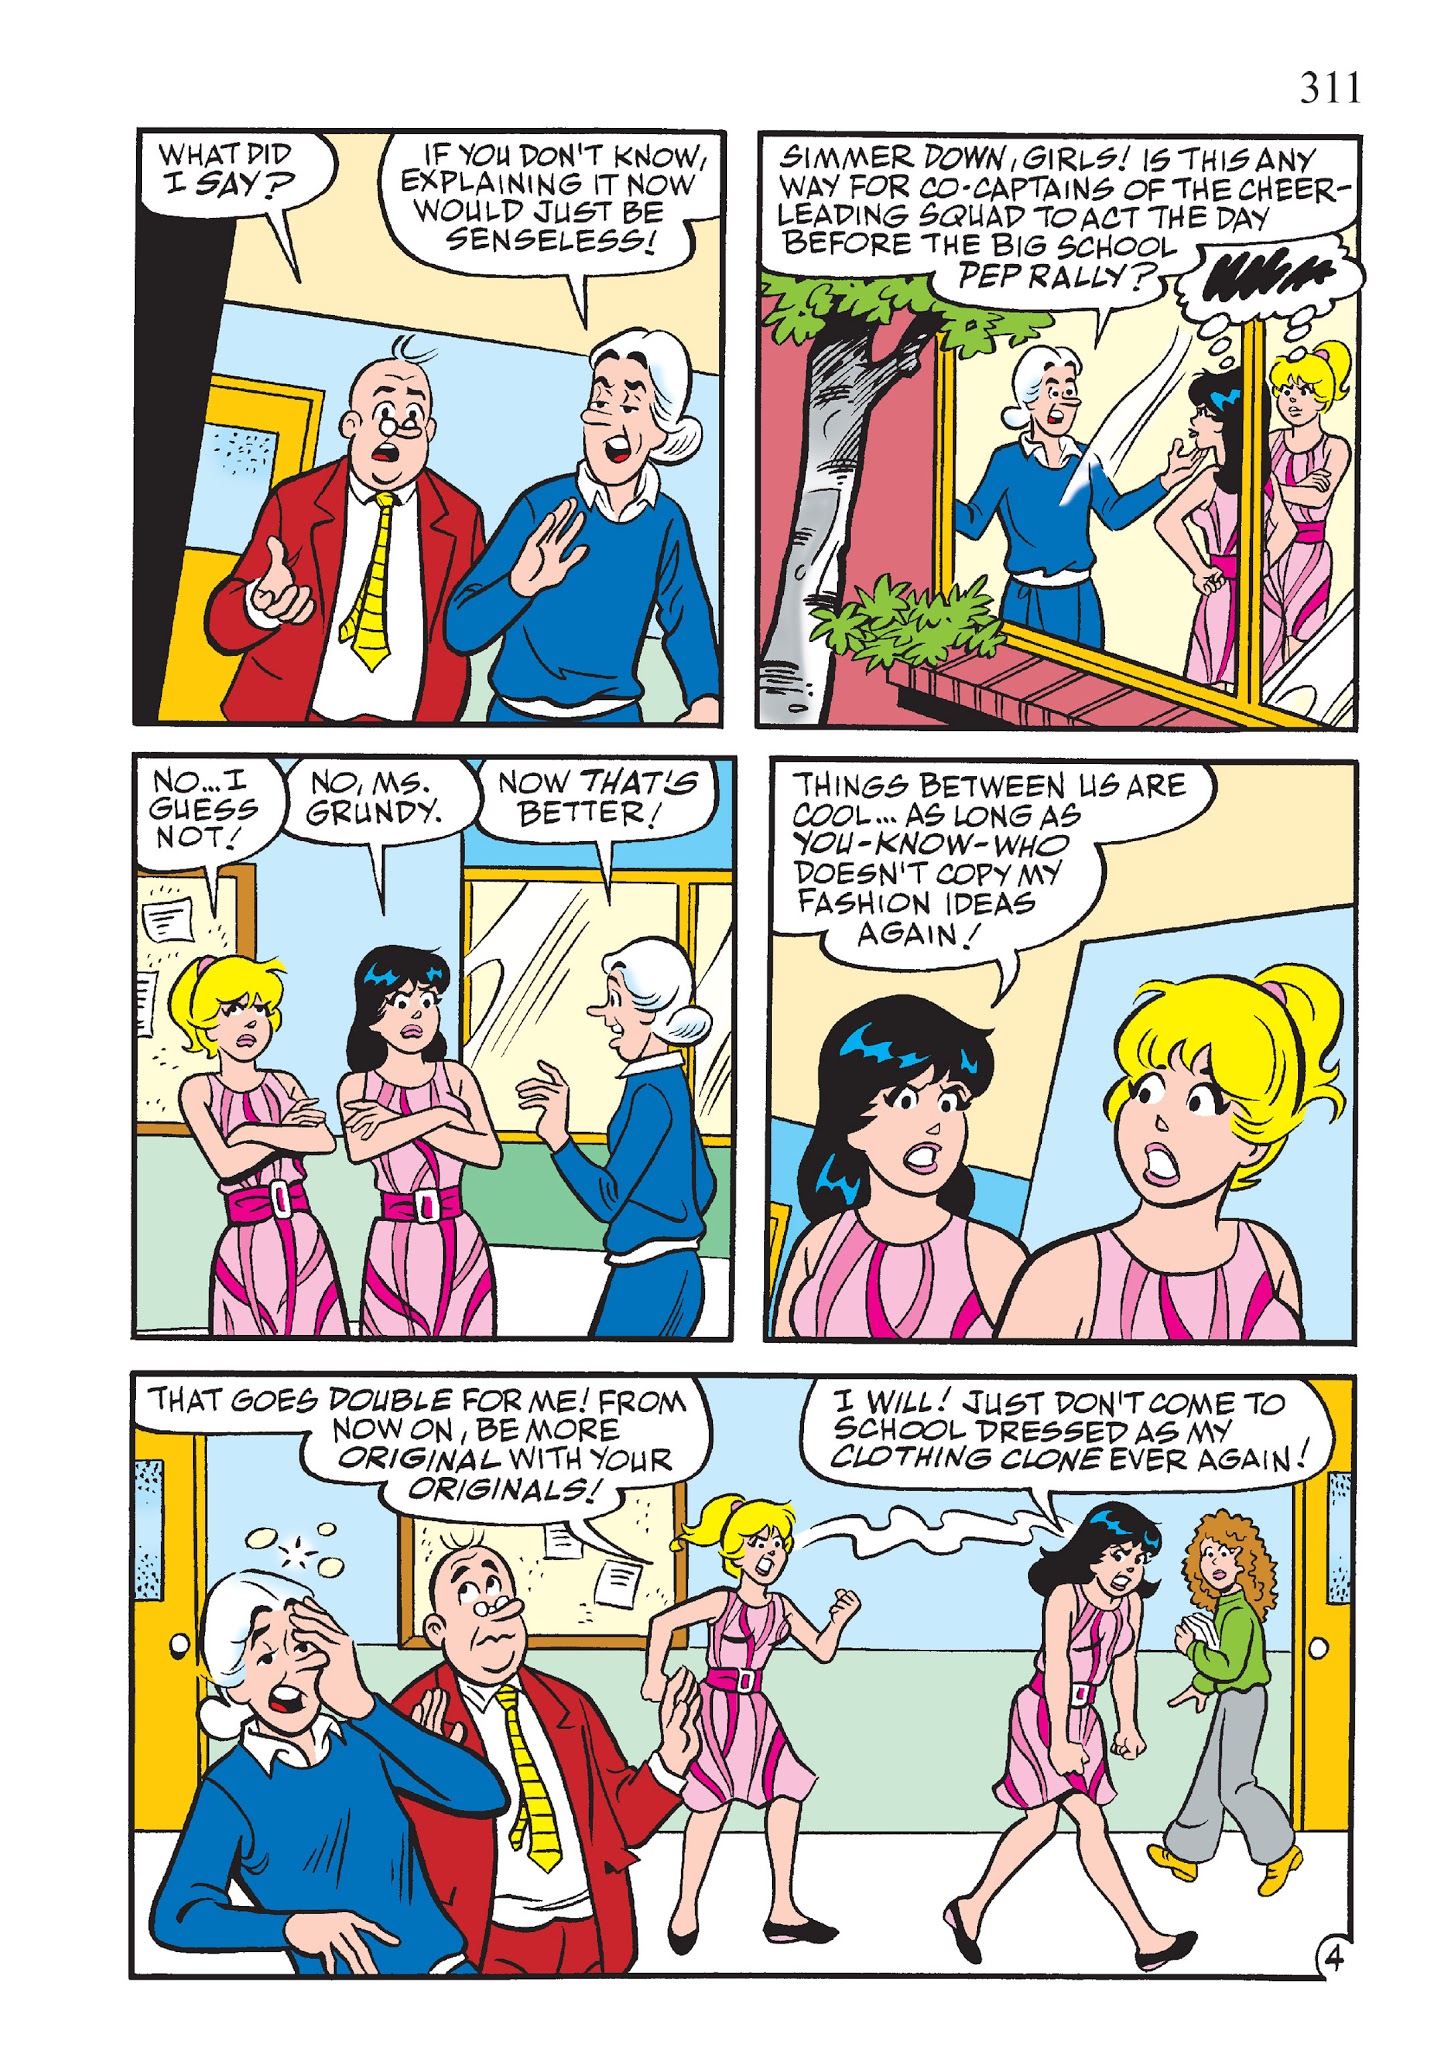 Read online The Best of Archie Comics: Betty & Veronica comic -  Issue # TPB - 312